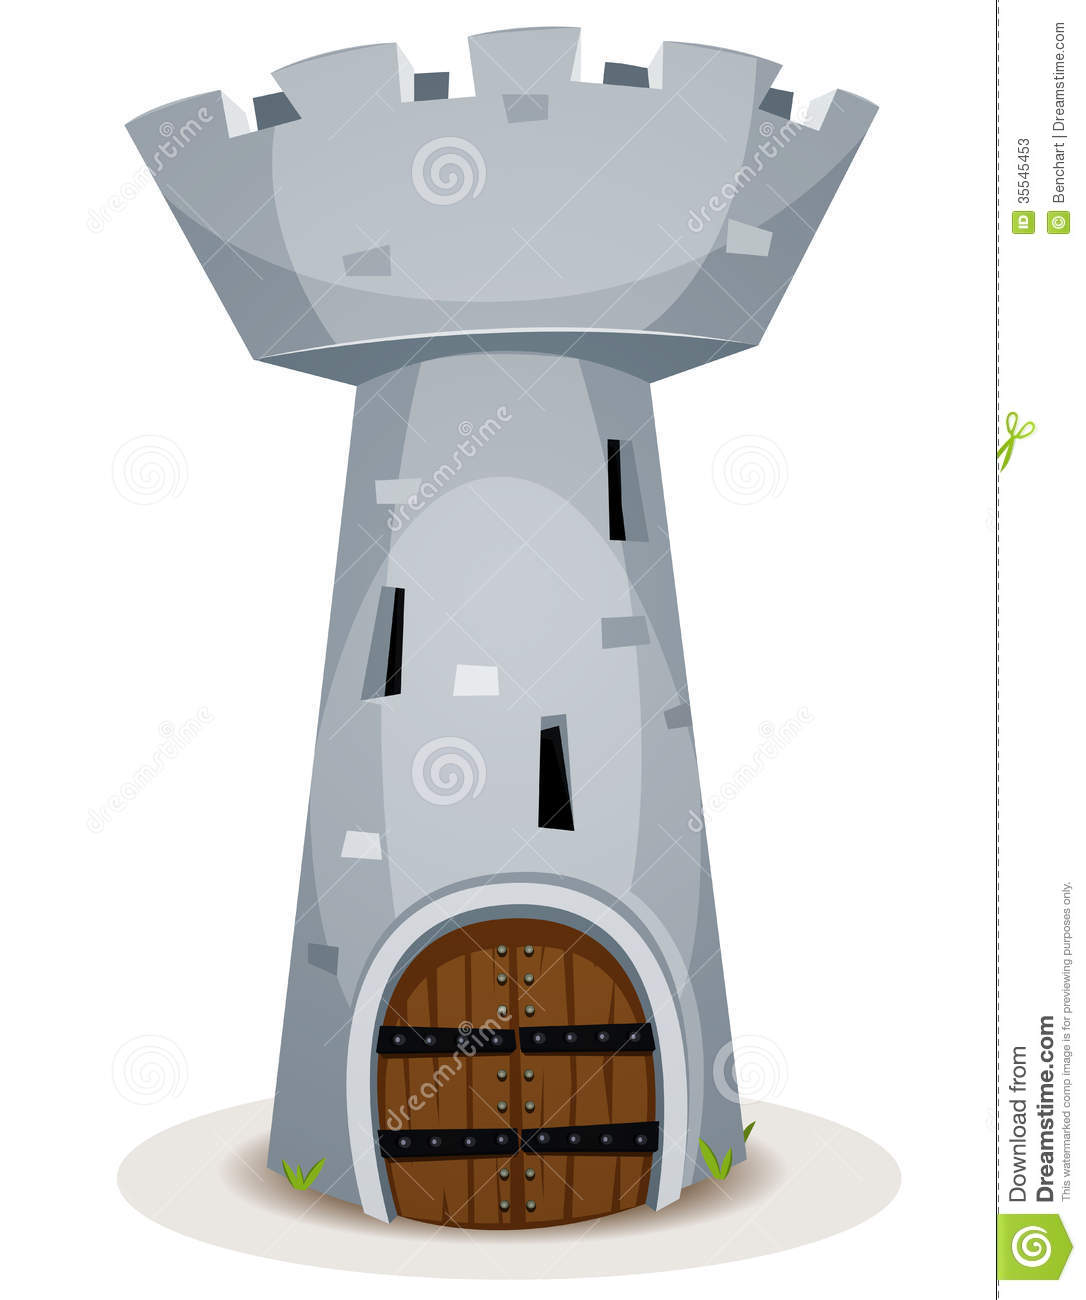 Illustration Of A Cartoon Medieval Donjon Tower Of A Castle With